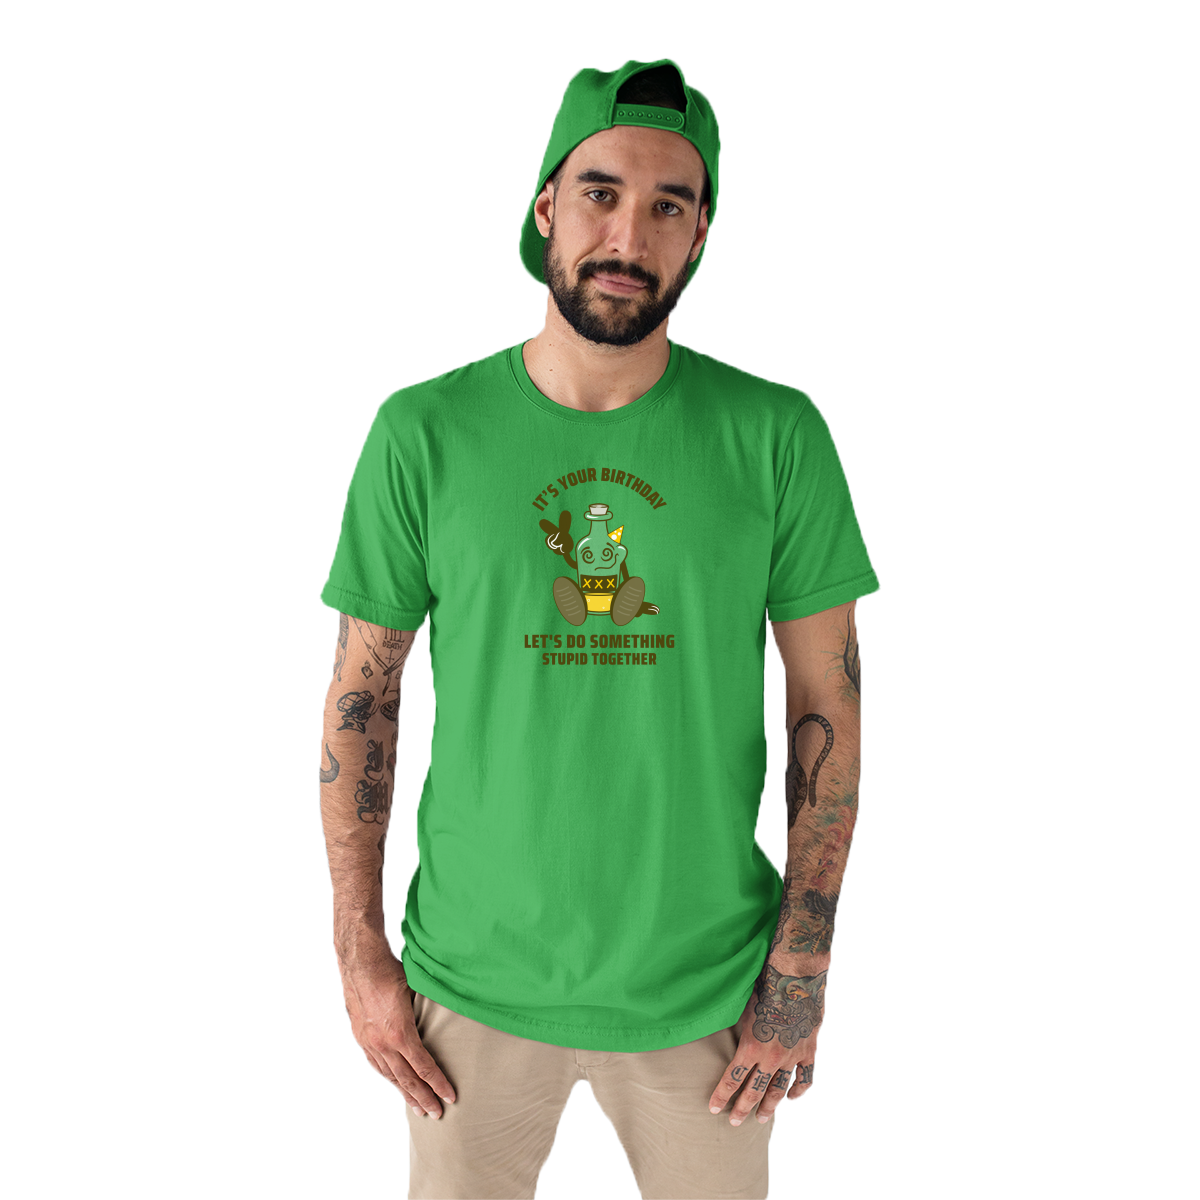 It is your Birthday Men's T-shirt | Green